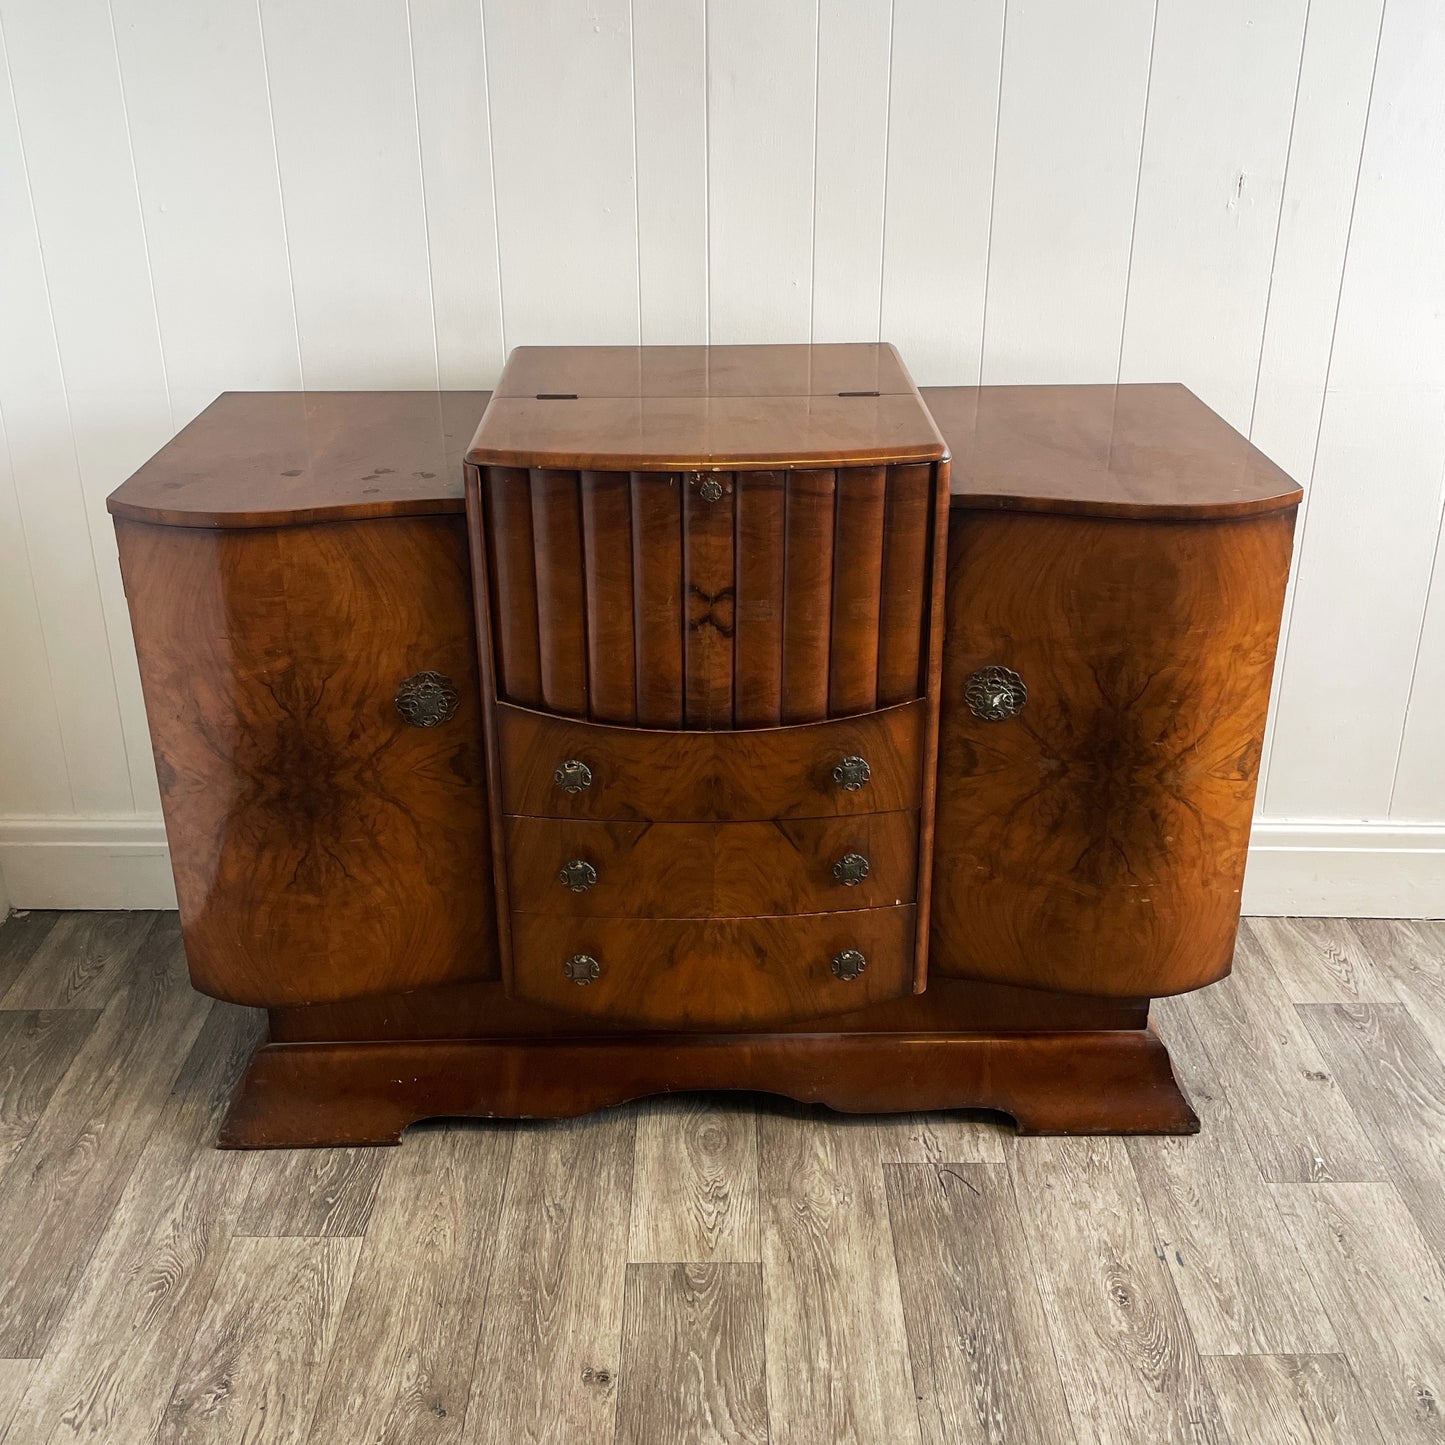 Large Art Deco Cocktail Cabinet Available for Commission